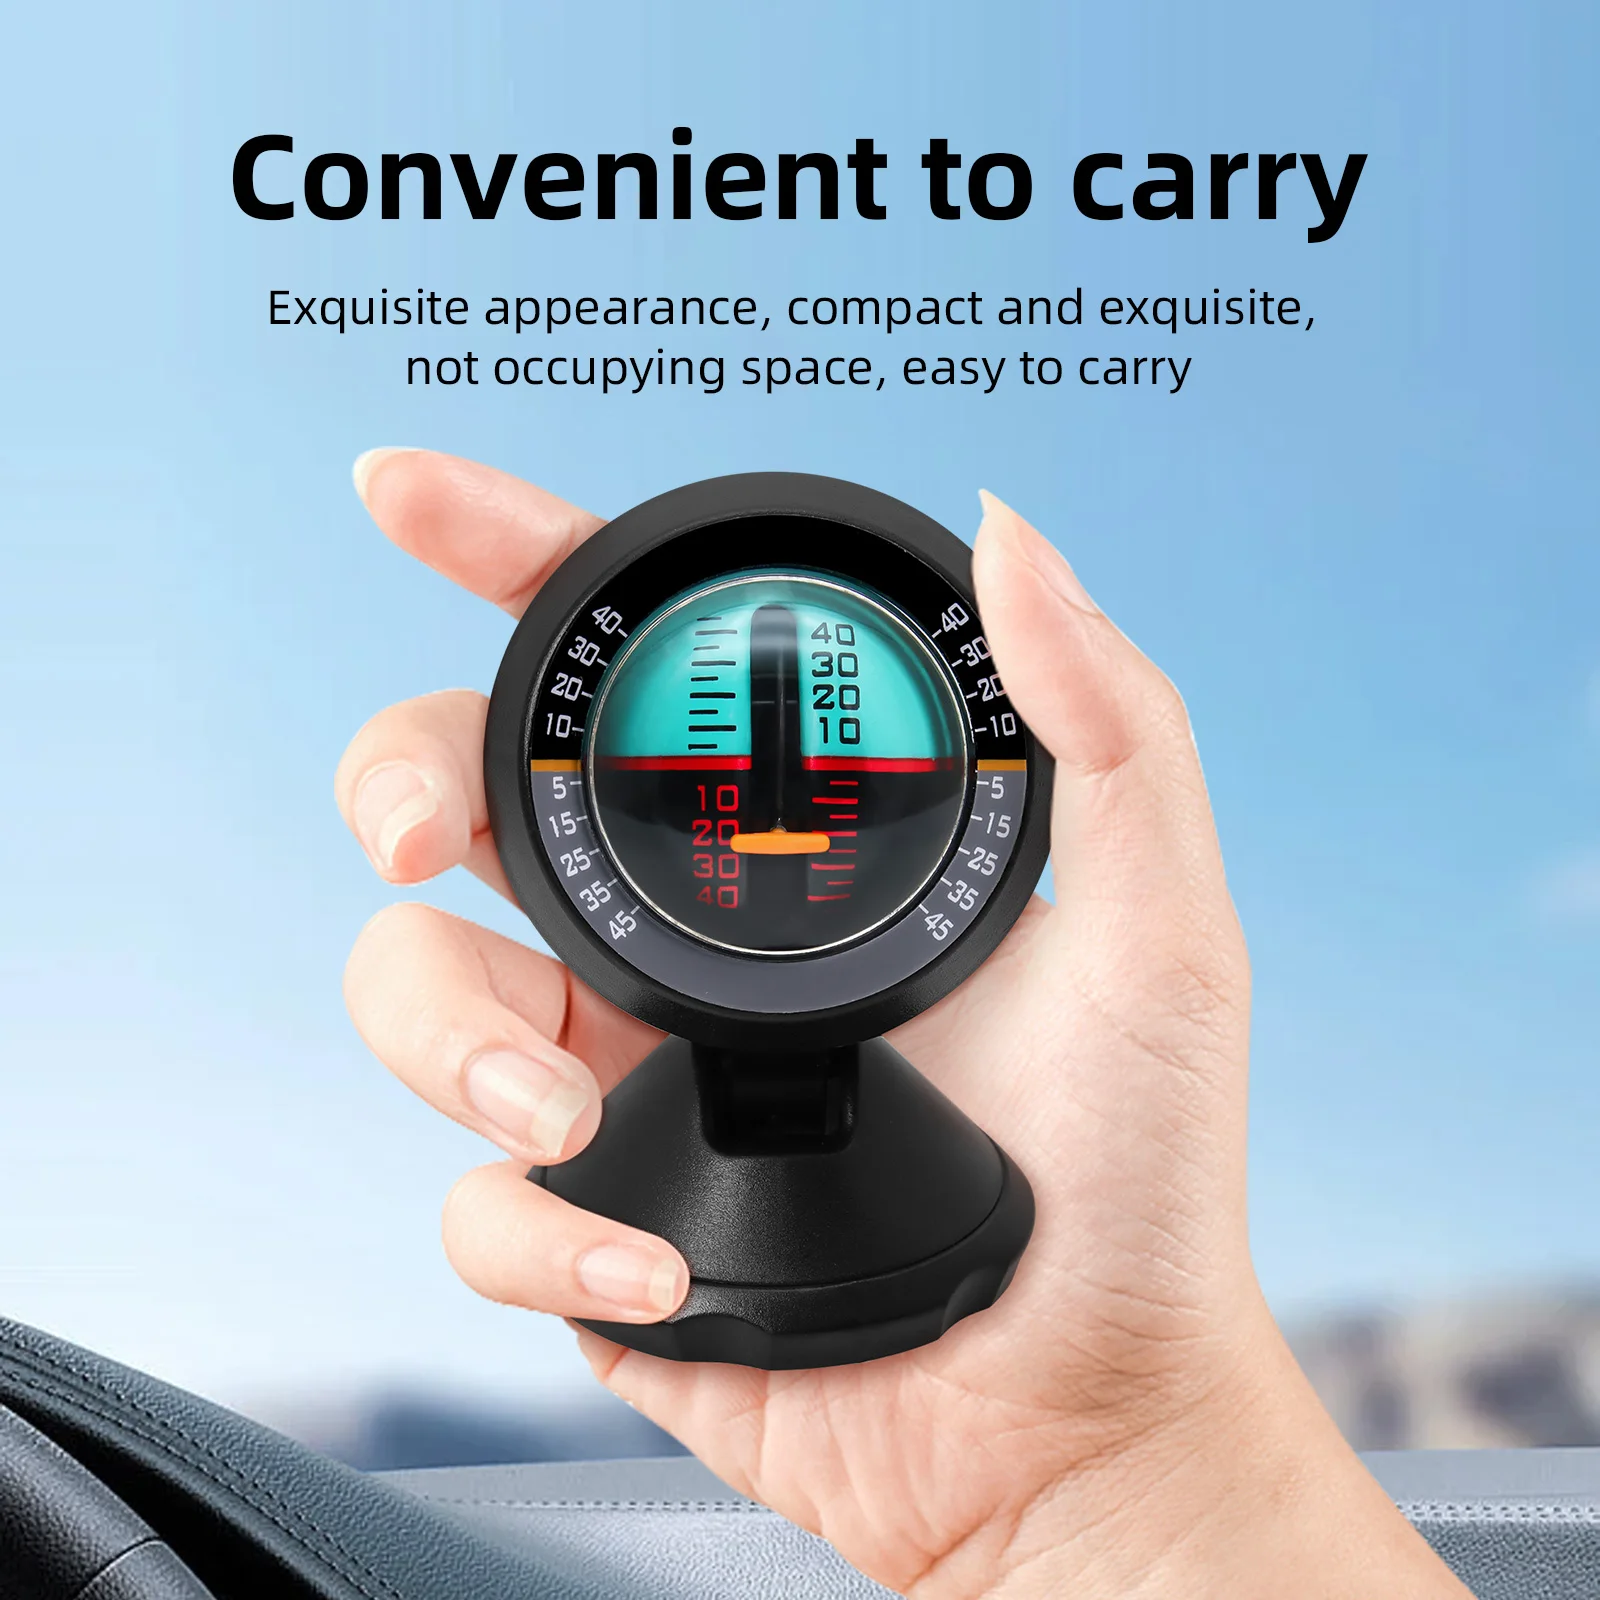 Portable Inclinometer Car Slope Meter Indicator Mounted High-precision Auto Measure Tool Vehicle Adjustable Slope Angle Compass